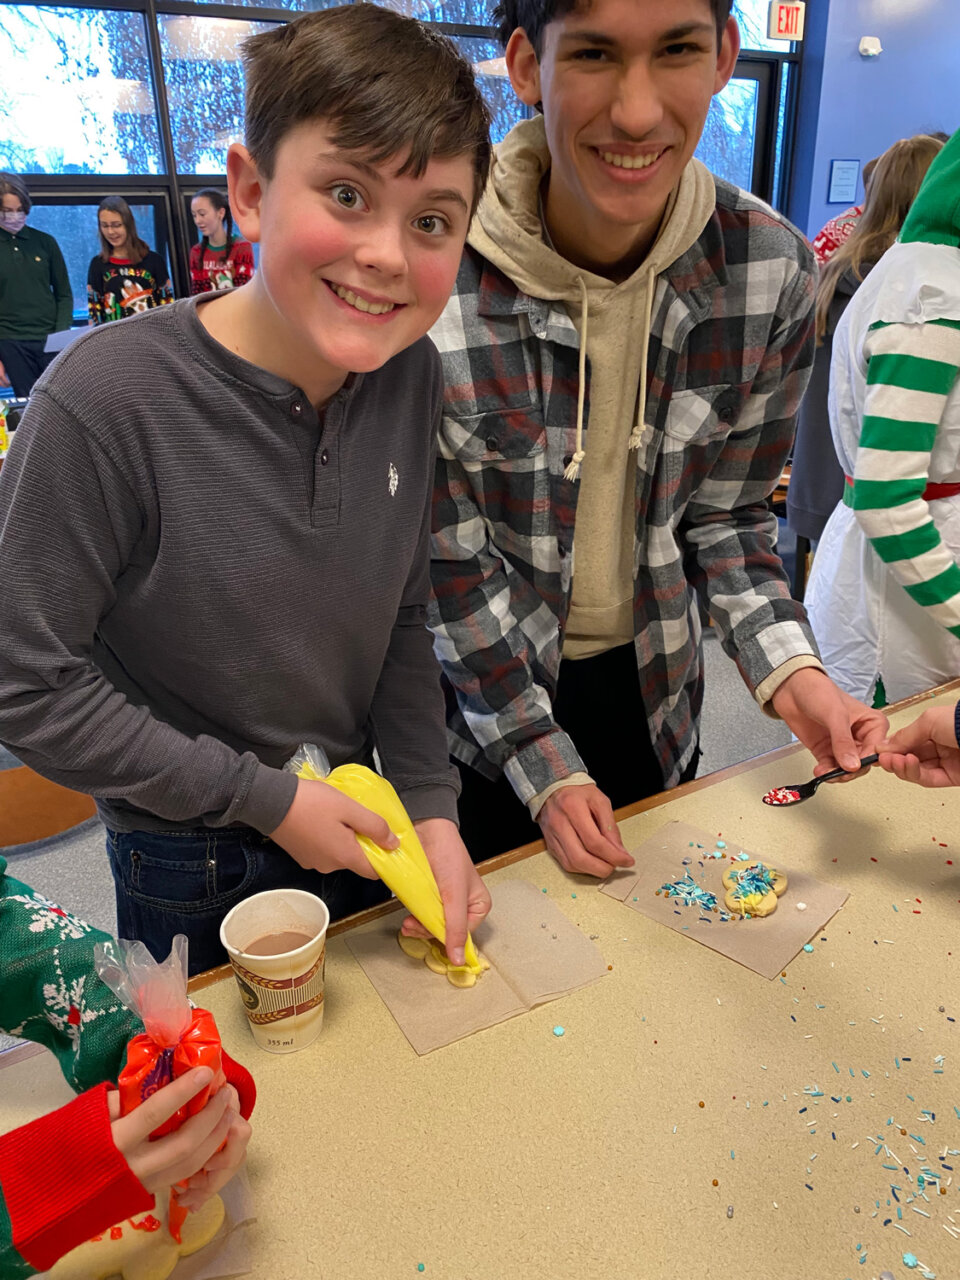 Williams School students decorating cookies with sprinkles while wearing festive clothes